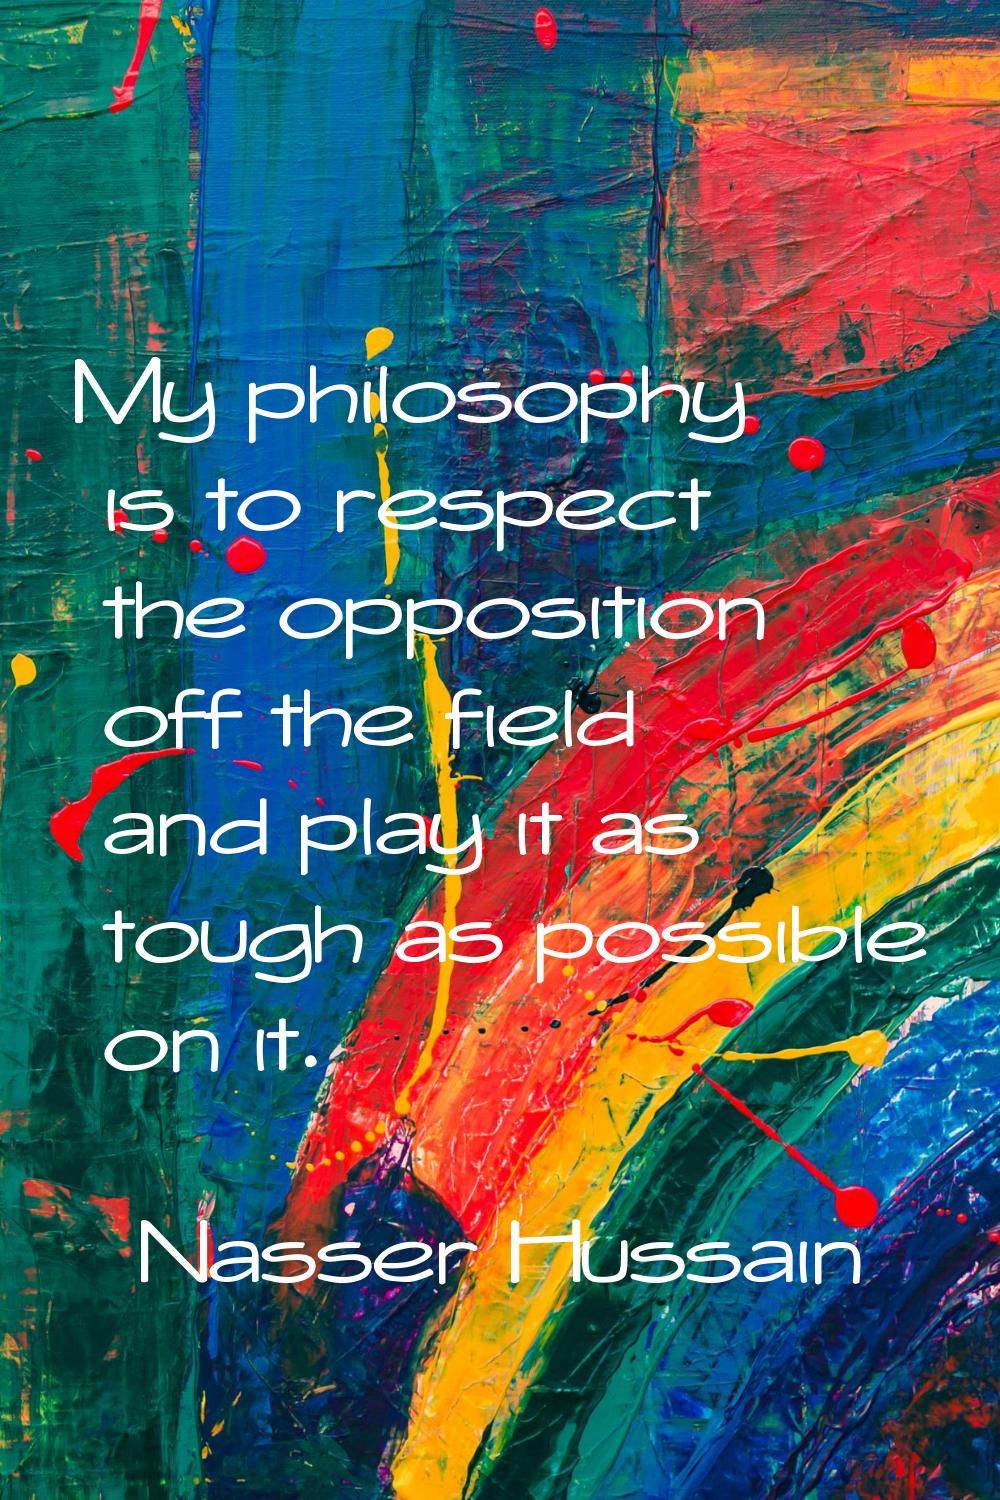 My philosophy is to respect the opposition off the field and play it as tough as possible on it.